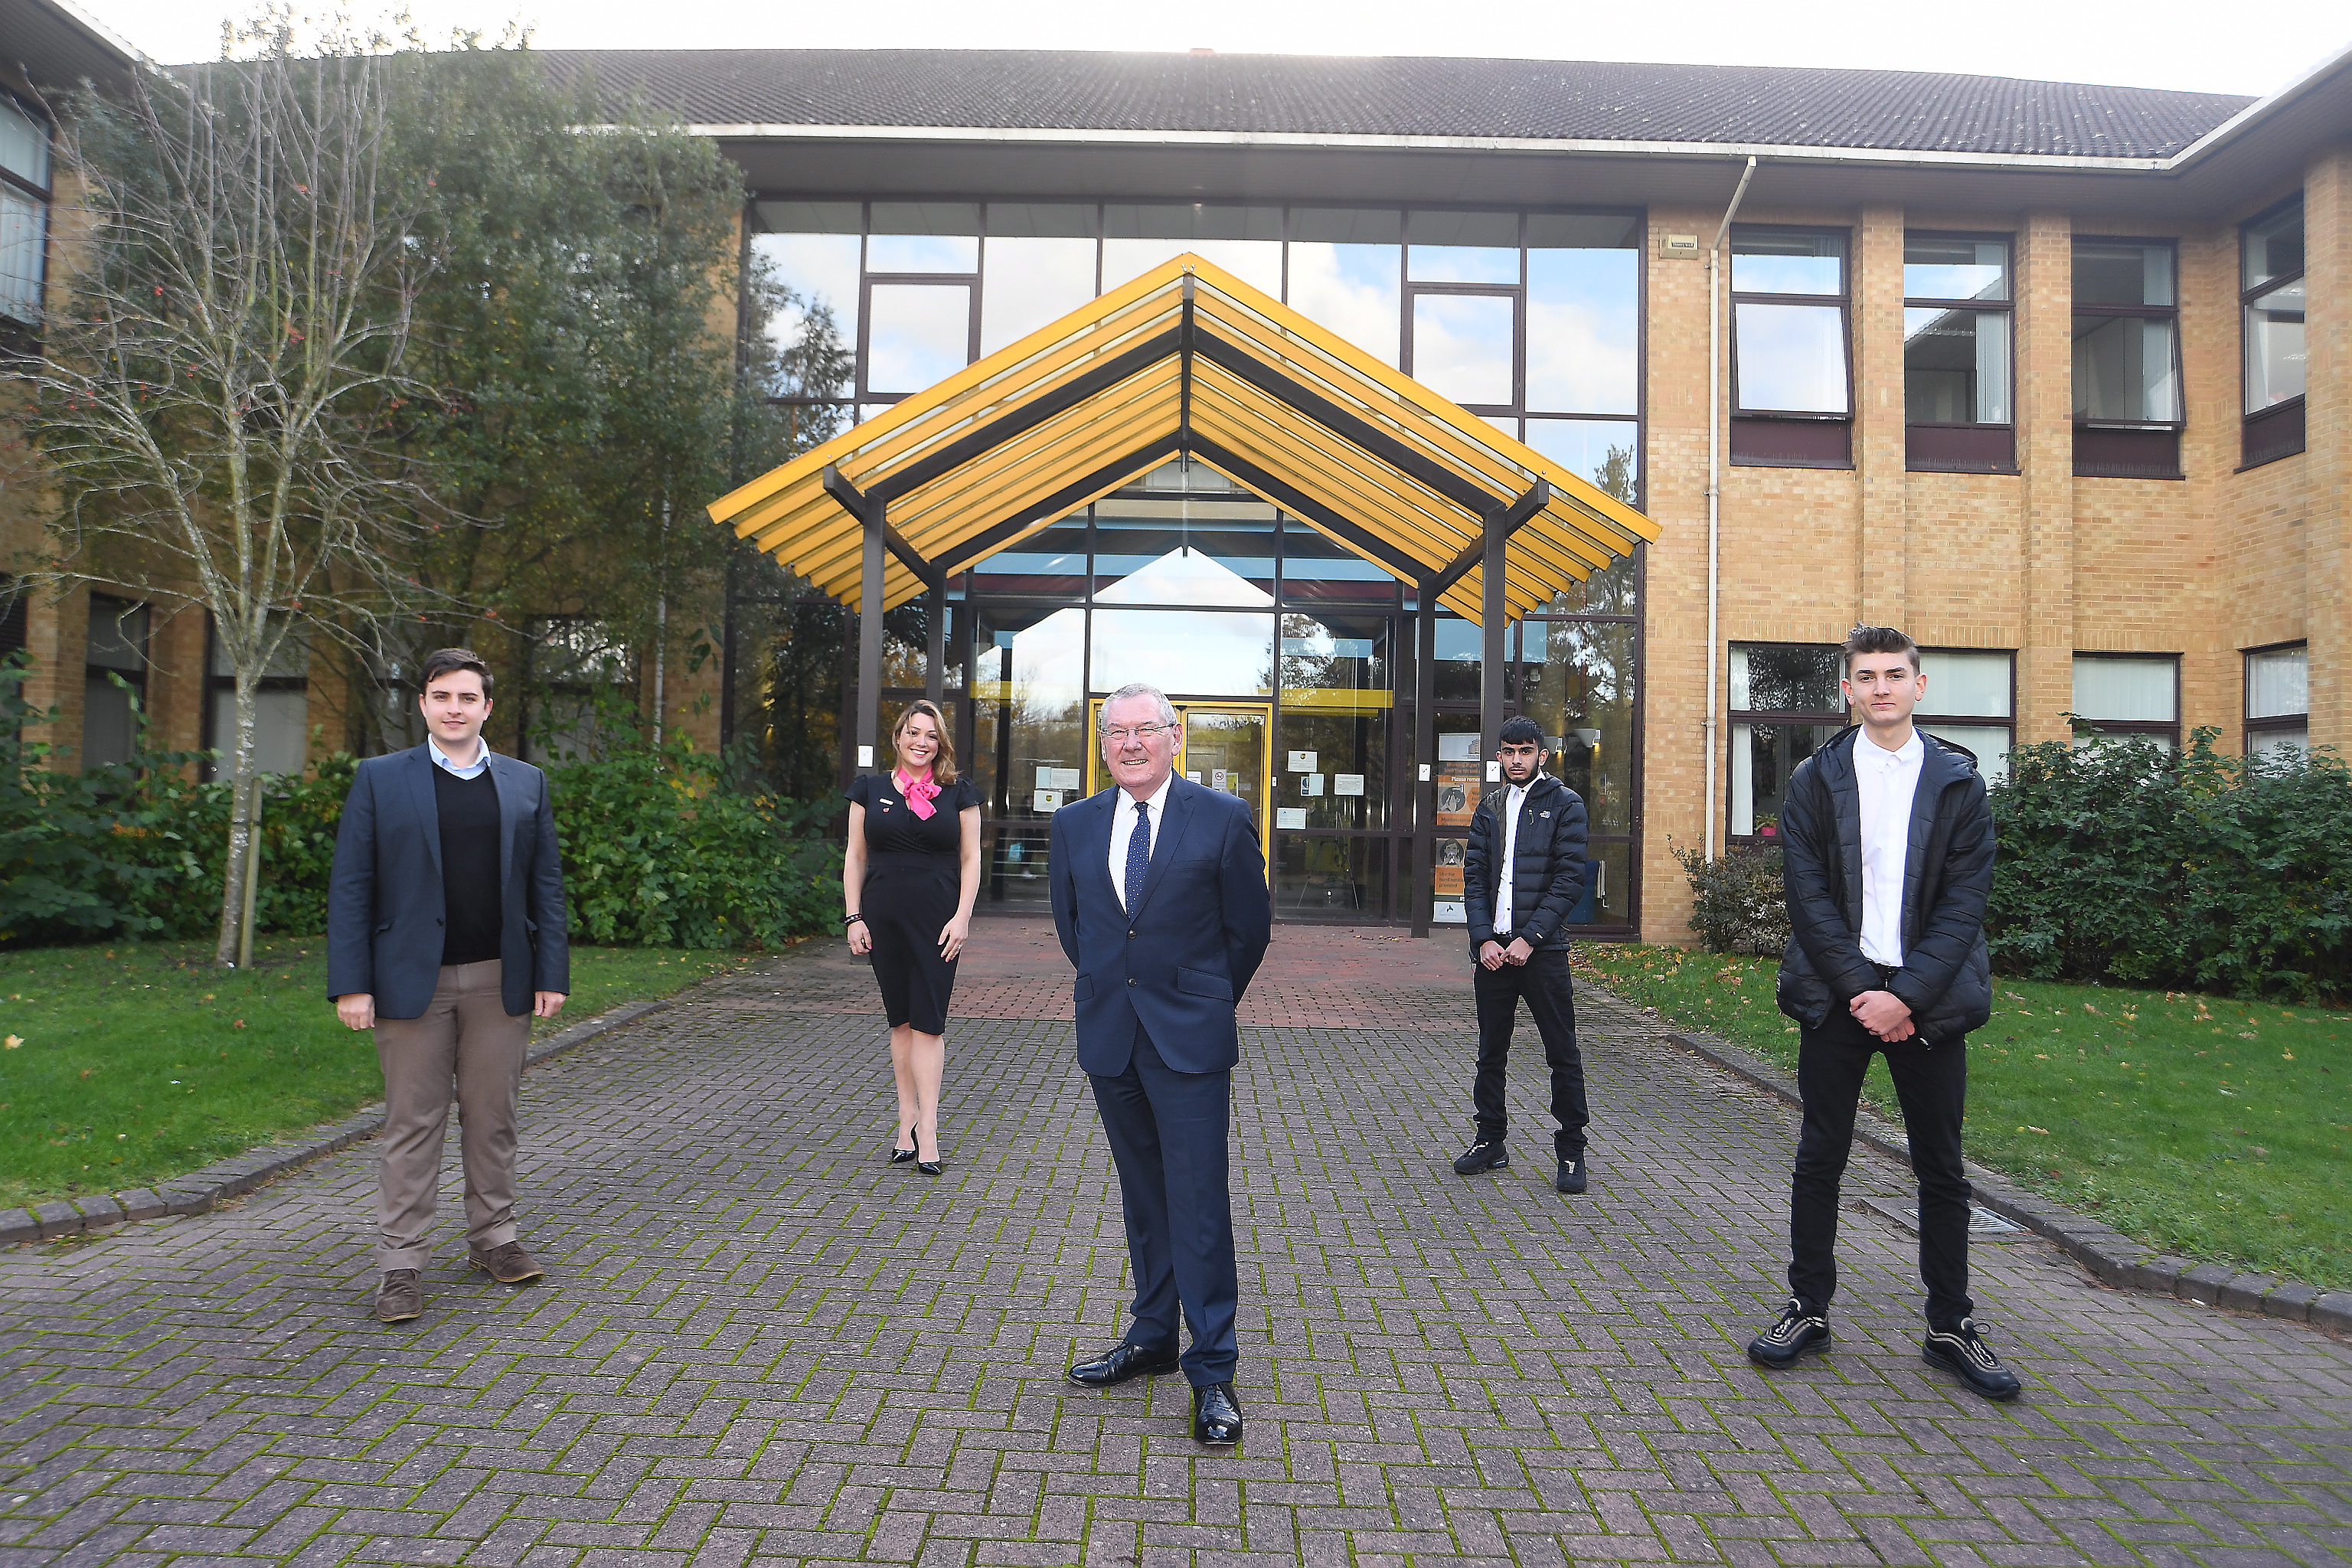 Pictured outside PET-Xi’s Coventry office are L-R Sean Rose, head of policy at Coventry and Warwickshire Chamber of Commerce, PET-Xi managing director Fleur Sexton, deputy Mayor of the West Midlands Cllr Bob Sleigh OBE, Dayyan Hamad and Ryan Hughes